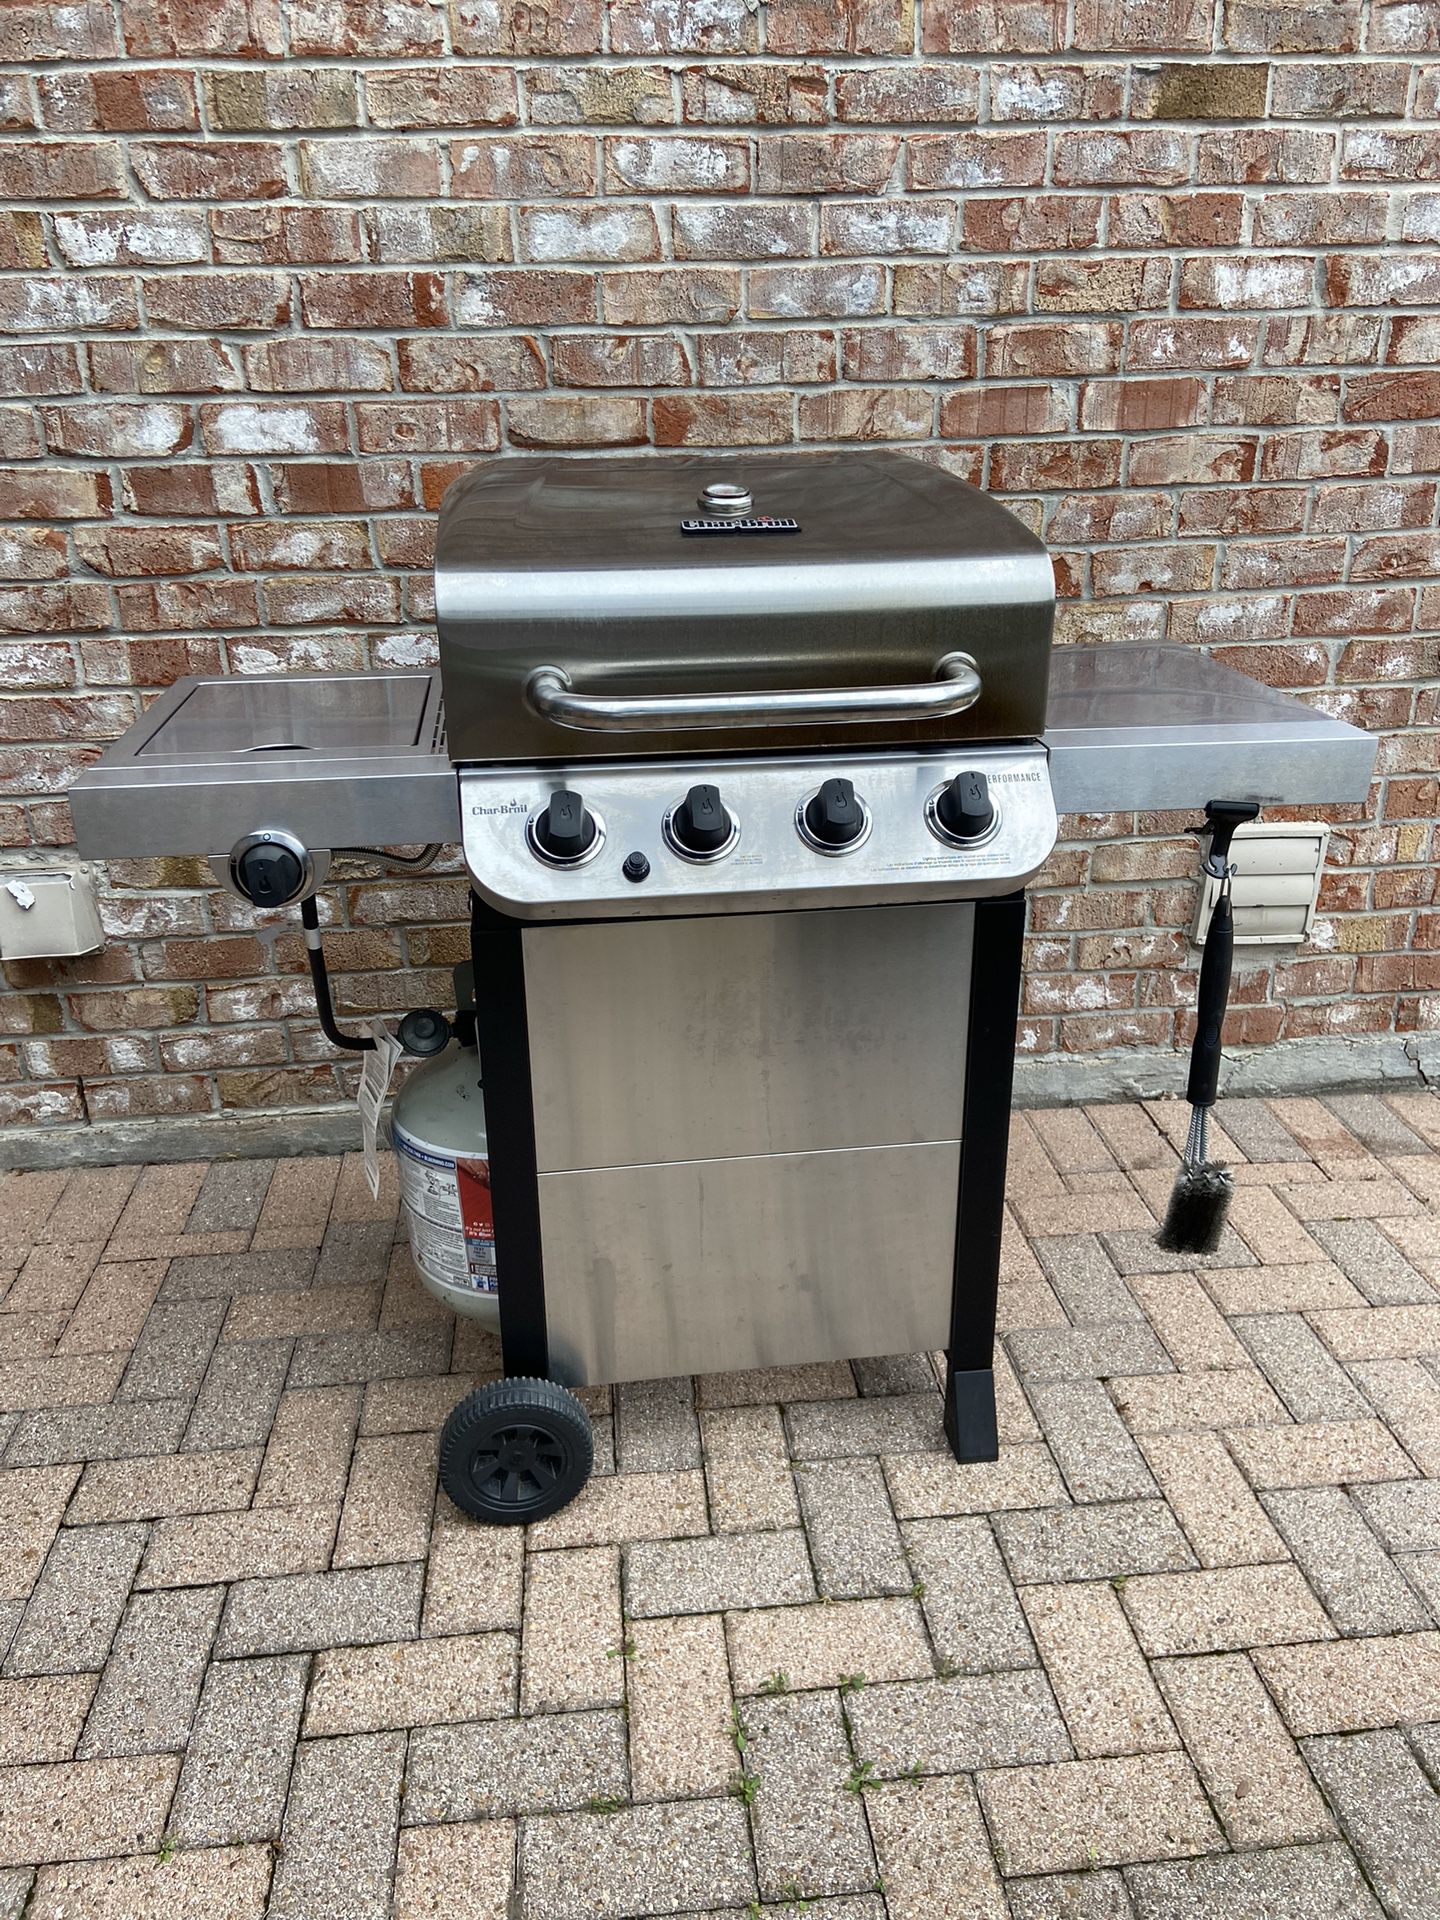 Char-Broil 4 burner Gas Grill Cover, Brush, and Propane tank for Sale in Houston, TX - OfferUp